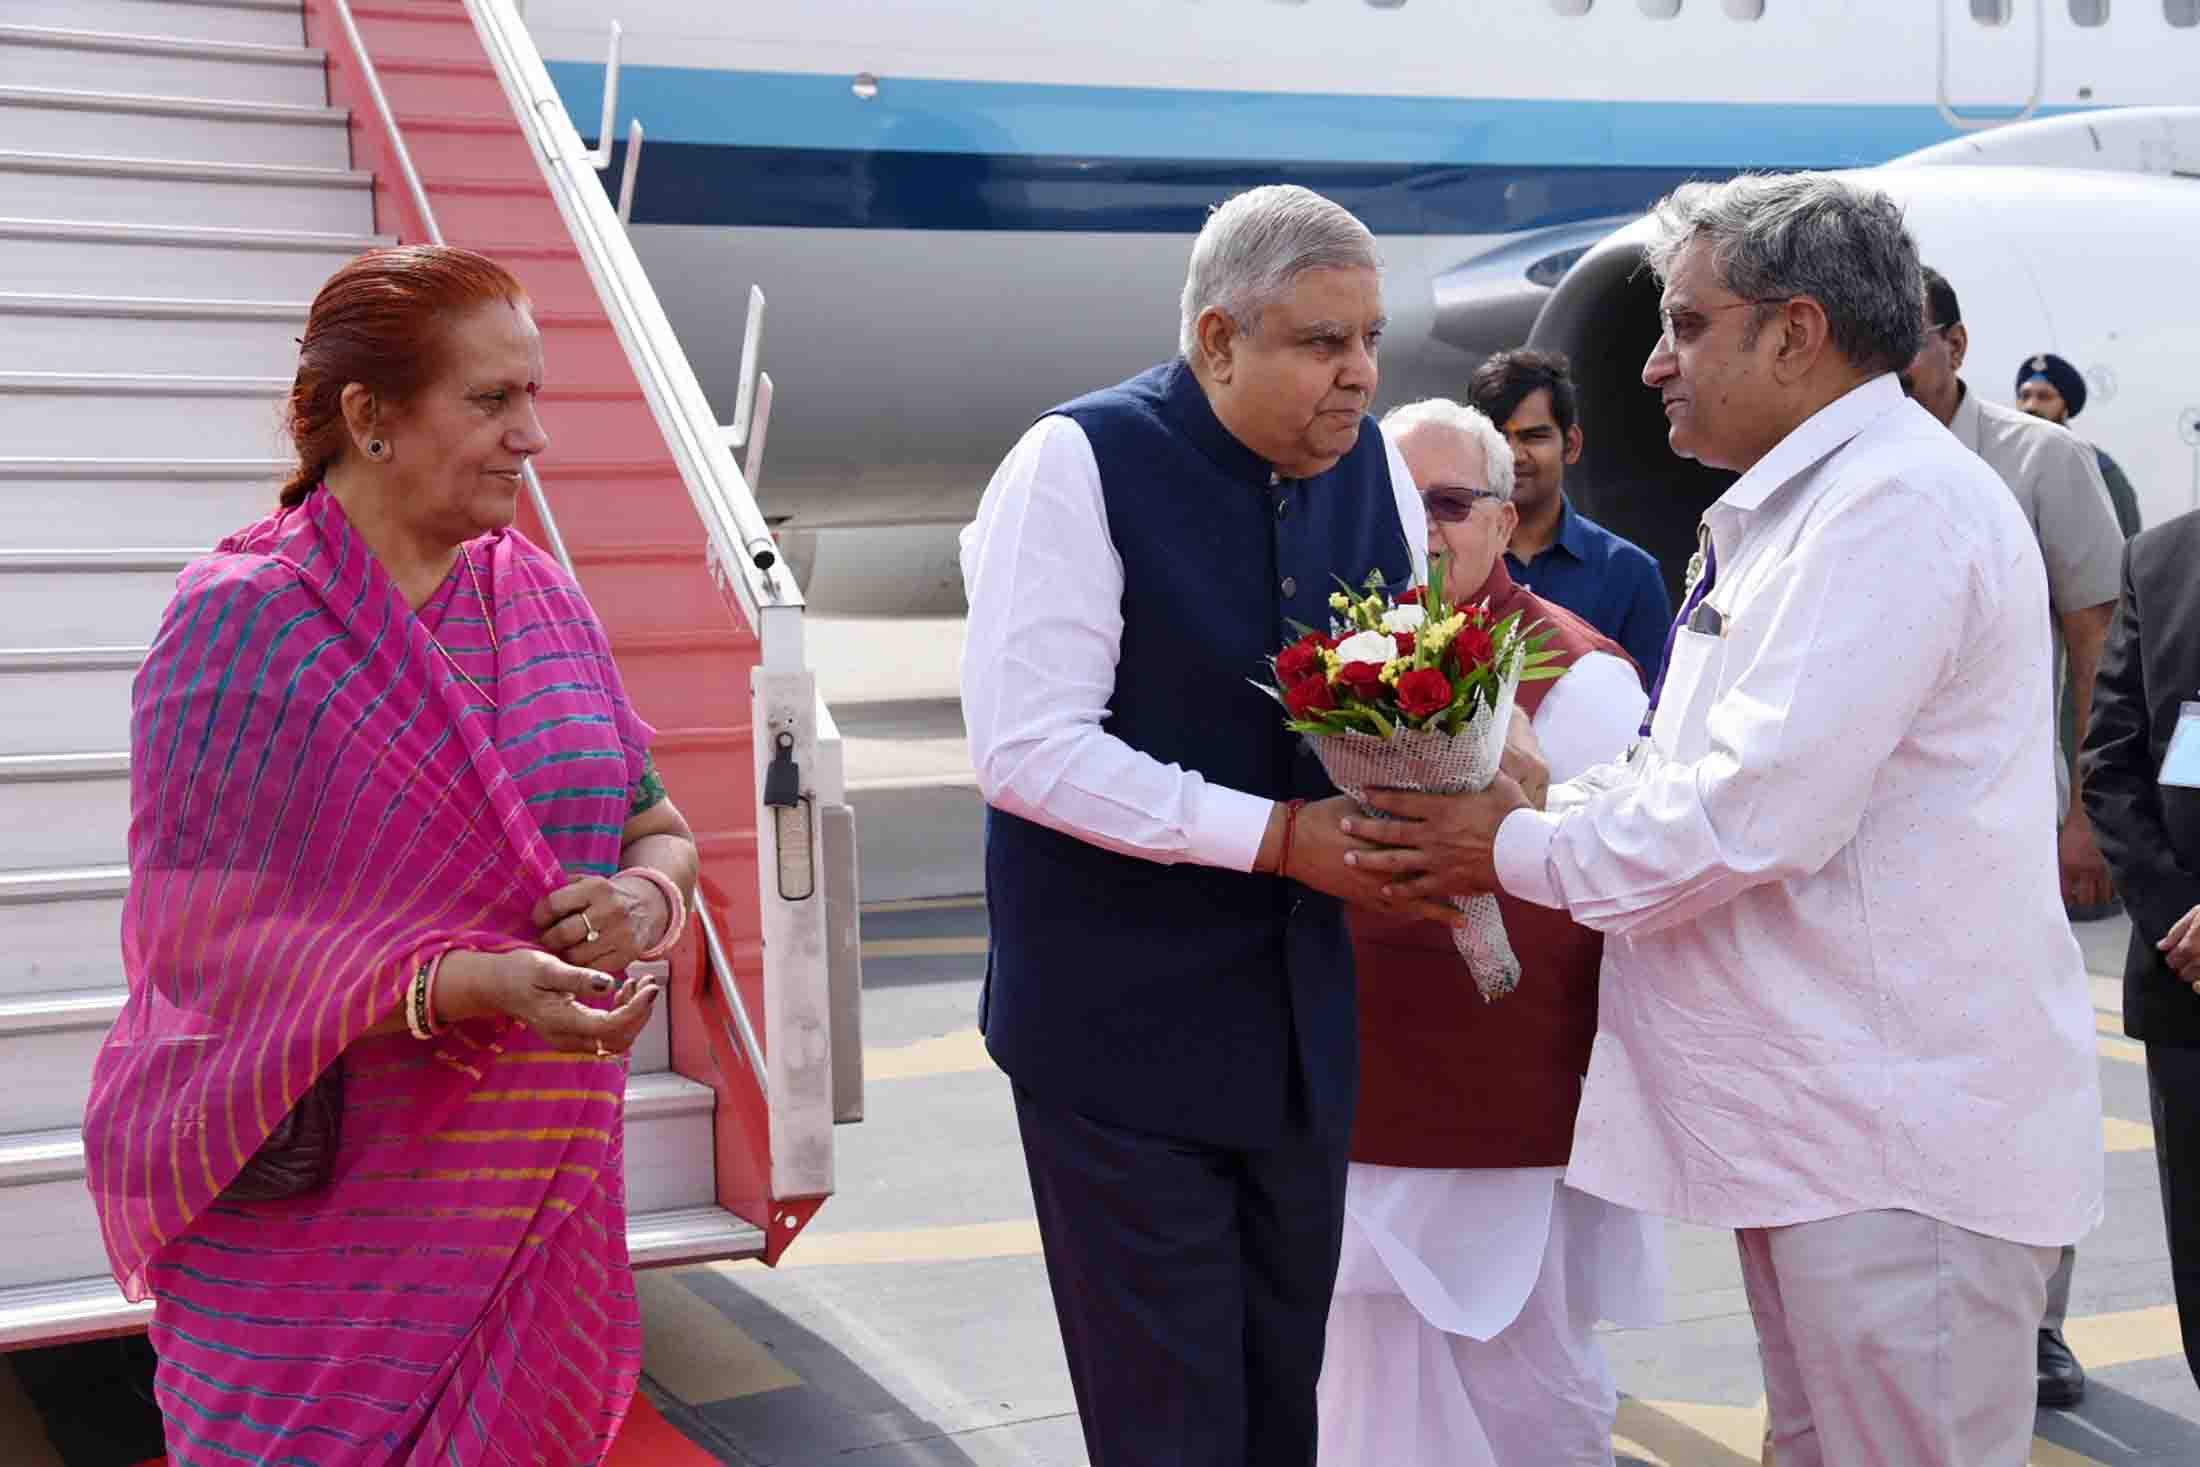 The Vice President, Shri Jagdeep Dhankhar, and  Dr. Sudesh Dhankhar being welcomed by Shri Kalraj Mishra, the Governor of Rajasthan and Shri Lalchand Kataria, Minister of Agriculture in Rajasthan on May 14, 2023.